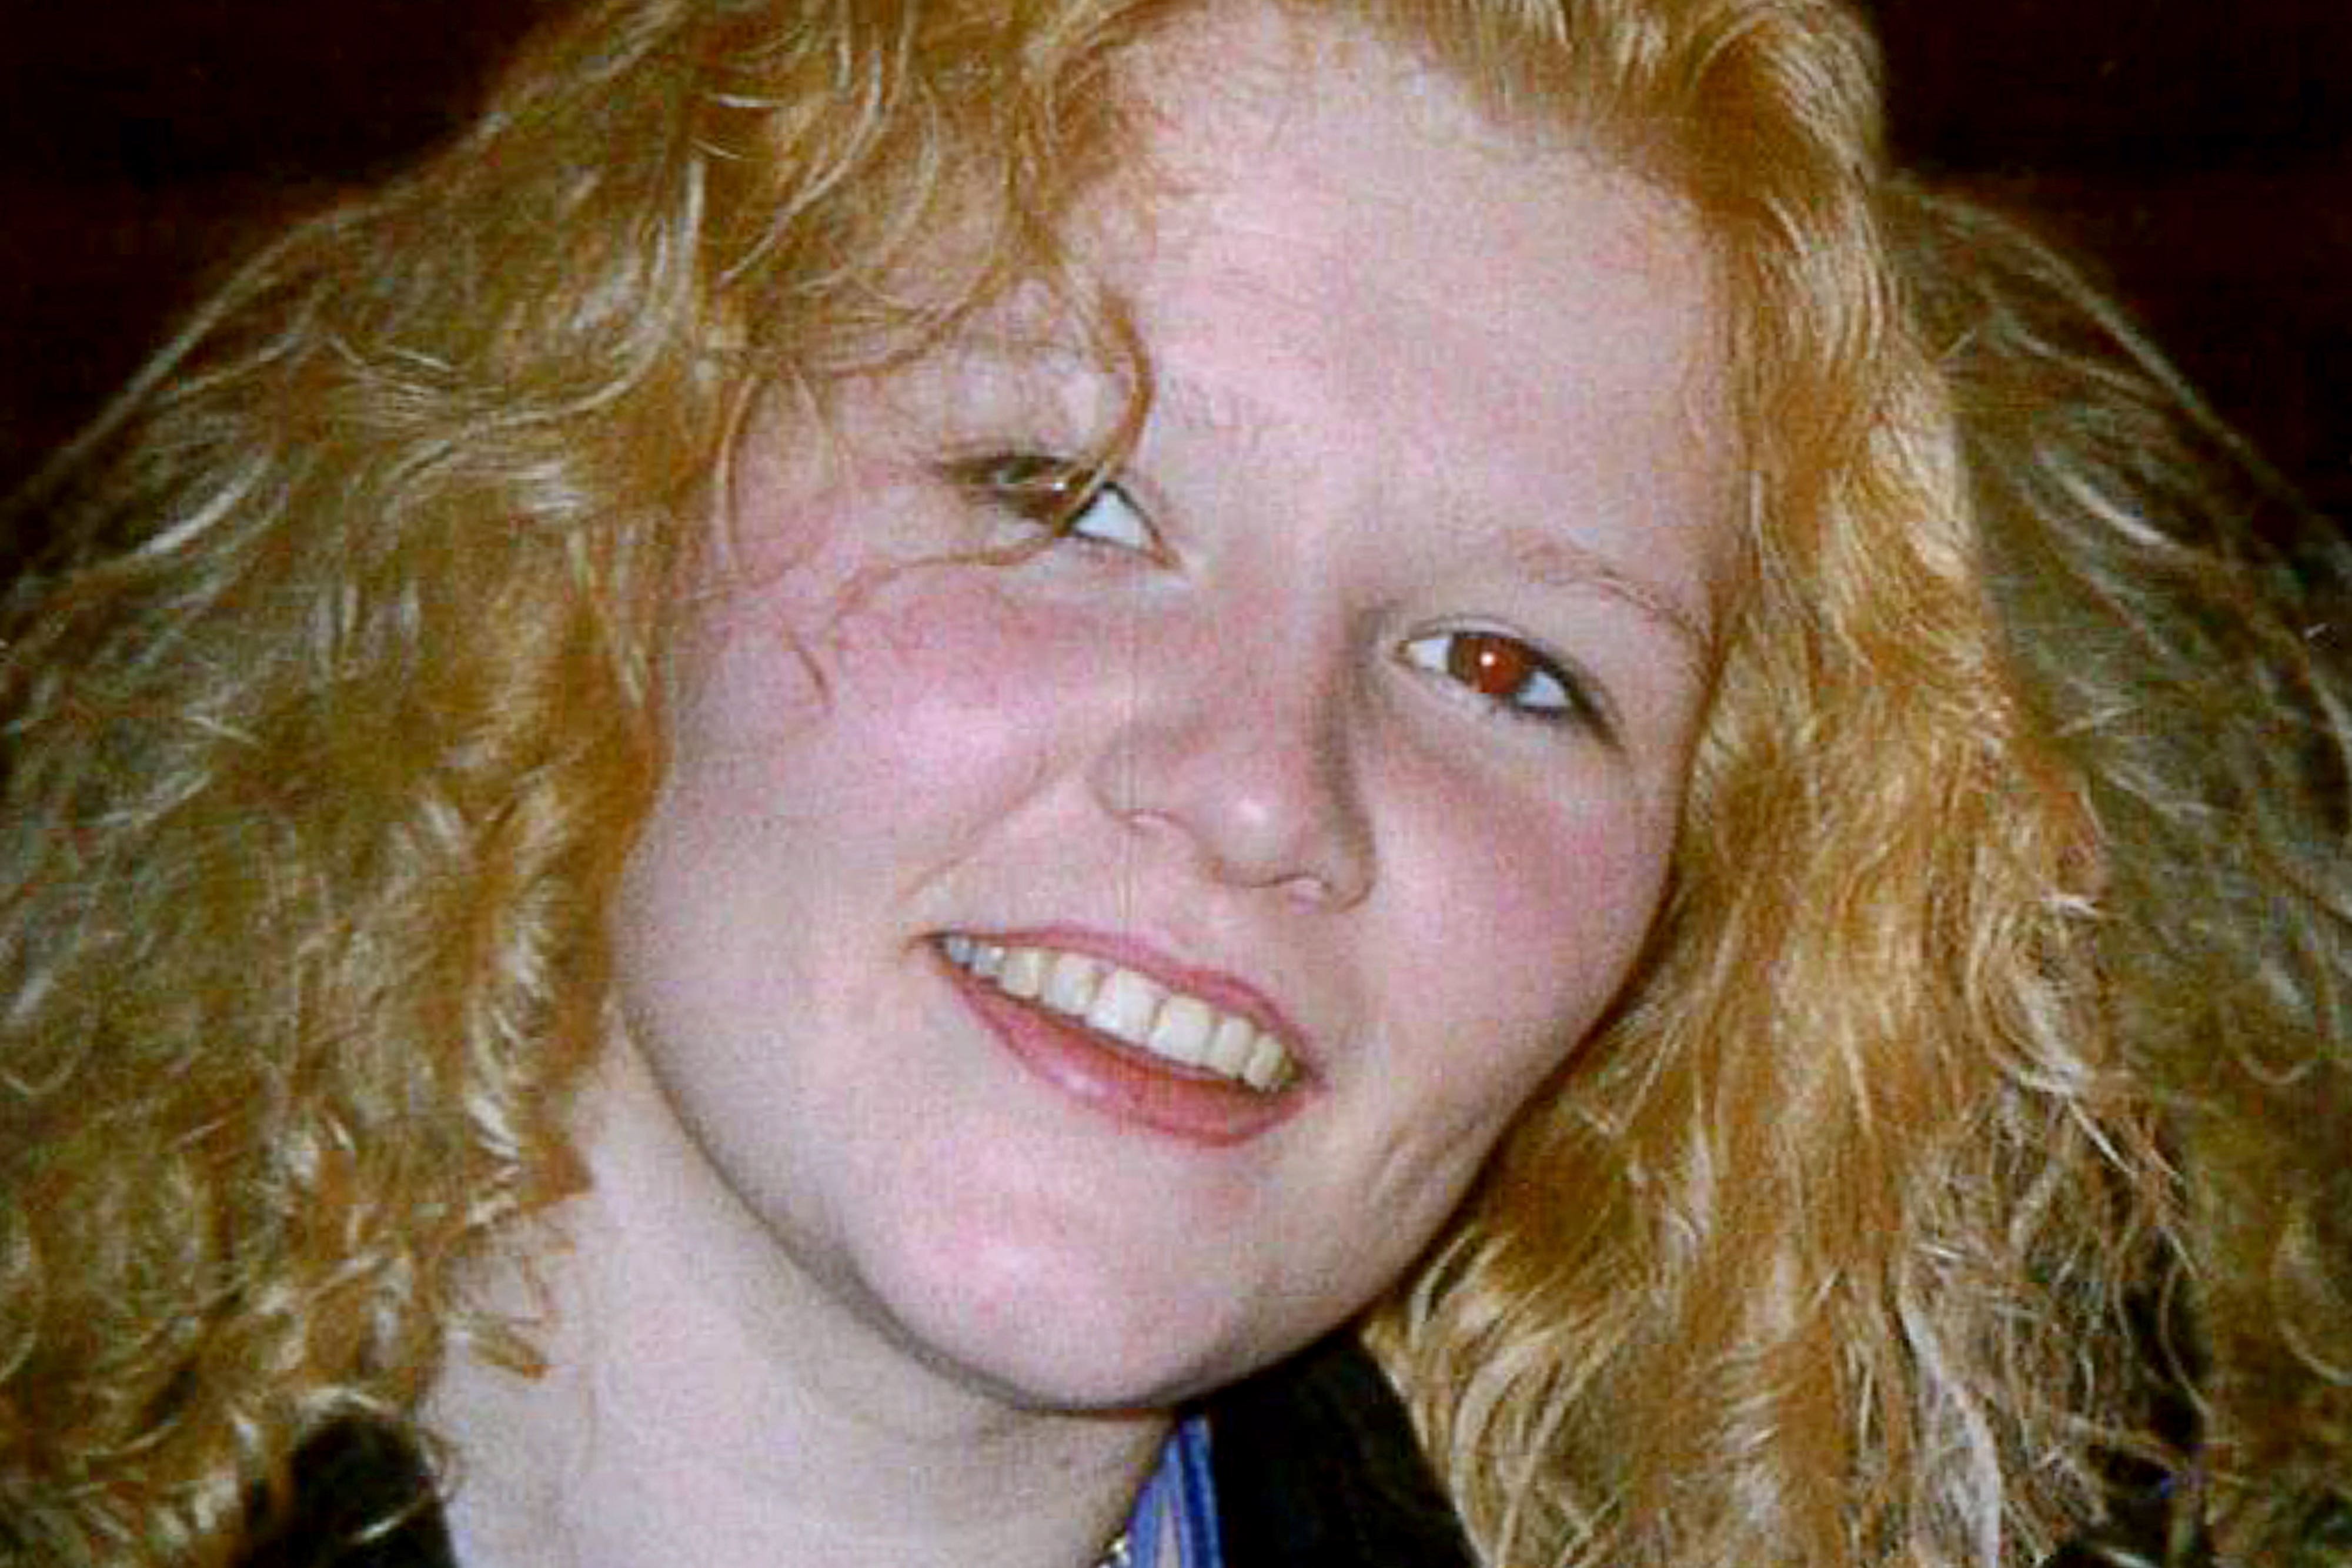 Emma Caldwell was killed by serial rapist Iain Packer in 2005